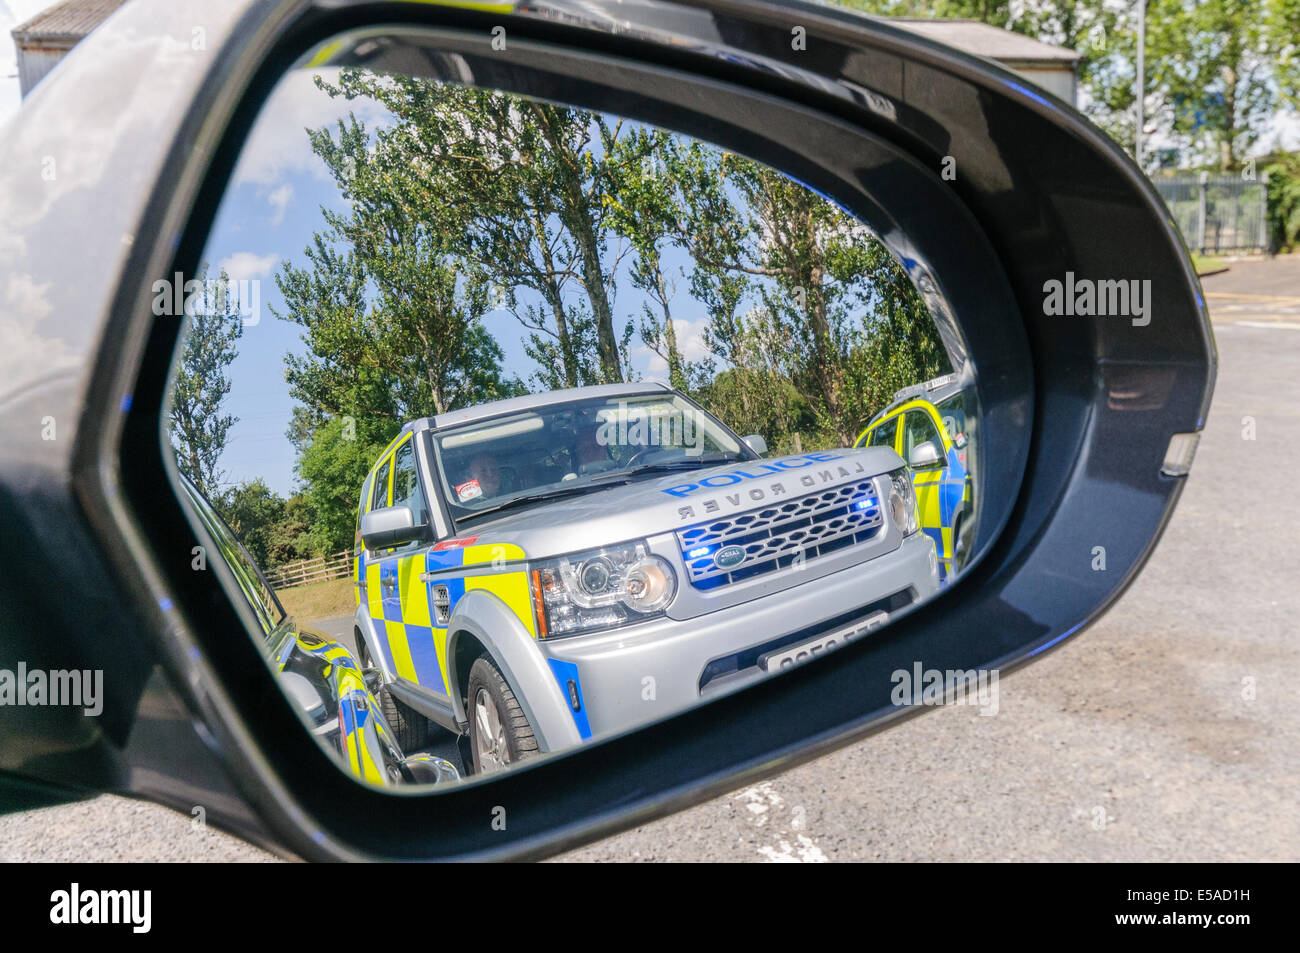 A police Landrover with flashing lights in the door mirror of a car (see also E5D39J) Stock Photo